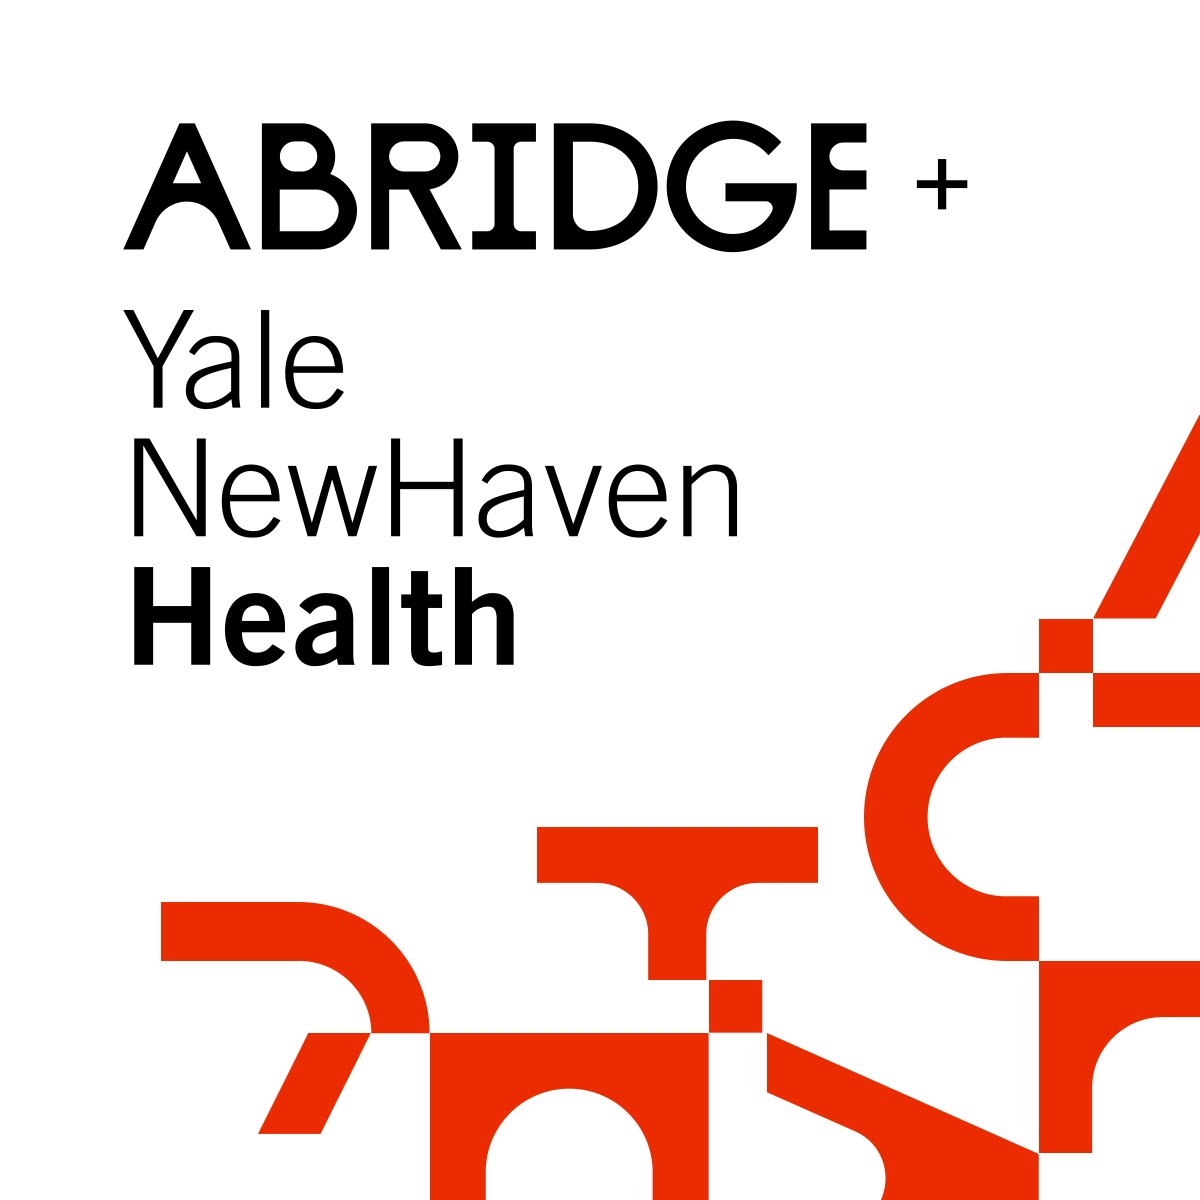 We're excited to announce a new enterprise agreement with @ynhhealth, the largest & most comprehensive healthcare system in Connecticut, that will give thousands of clinicians access to Abridge for clinical documentation. We look forward to being their AI partner!